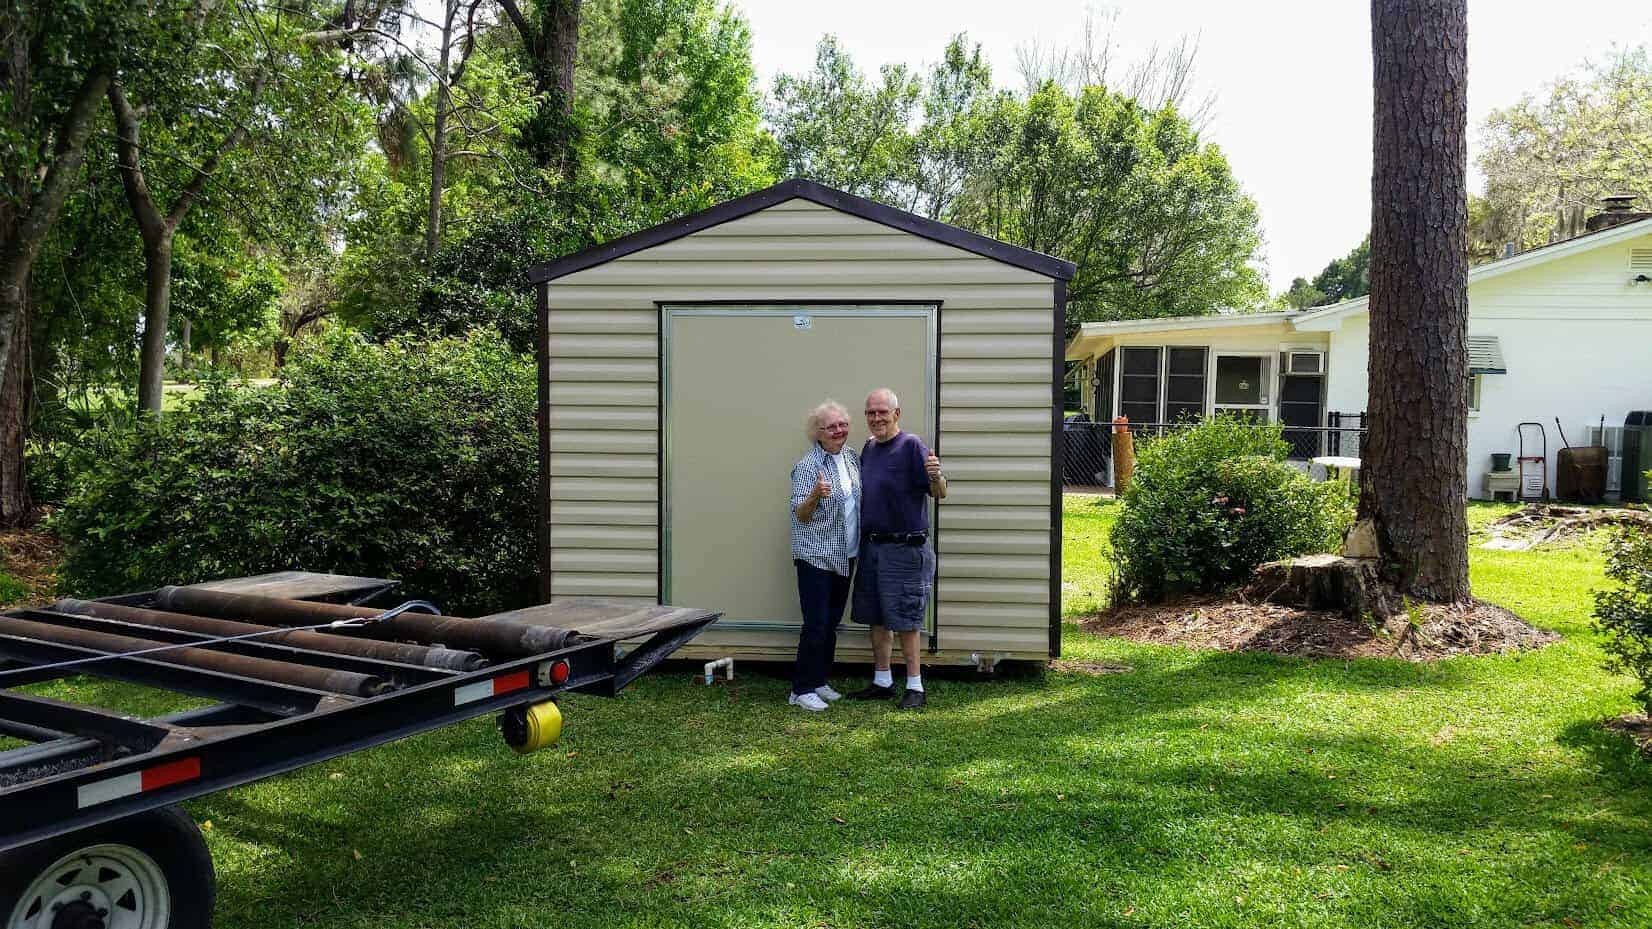 Buy 10x18 Sheds, Portable Buildings & Storage Sheds | Robin Sheds - Your Trusted Dealer for Outdoor Storage Solutions